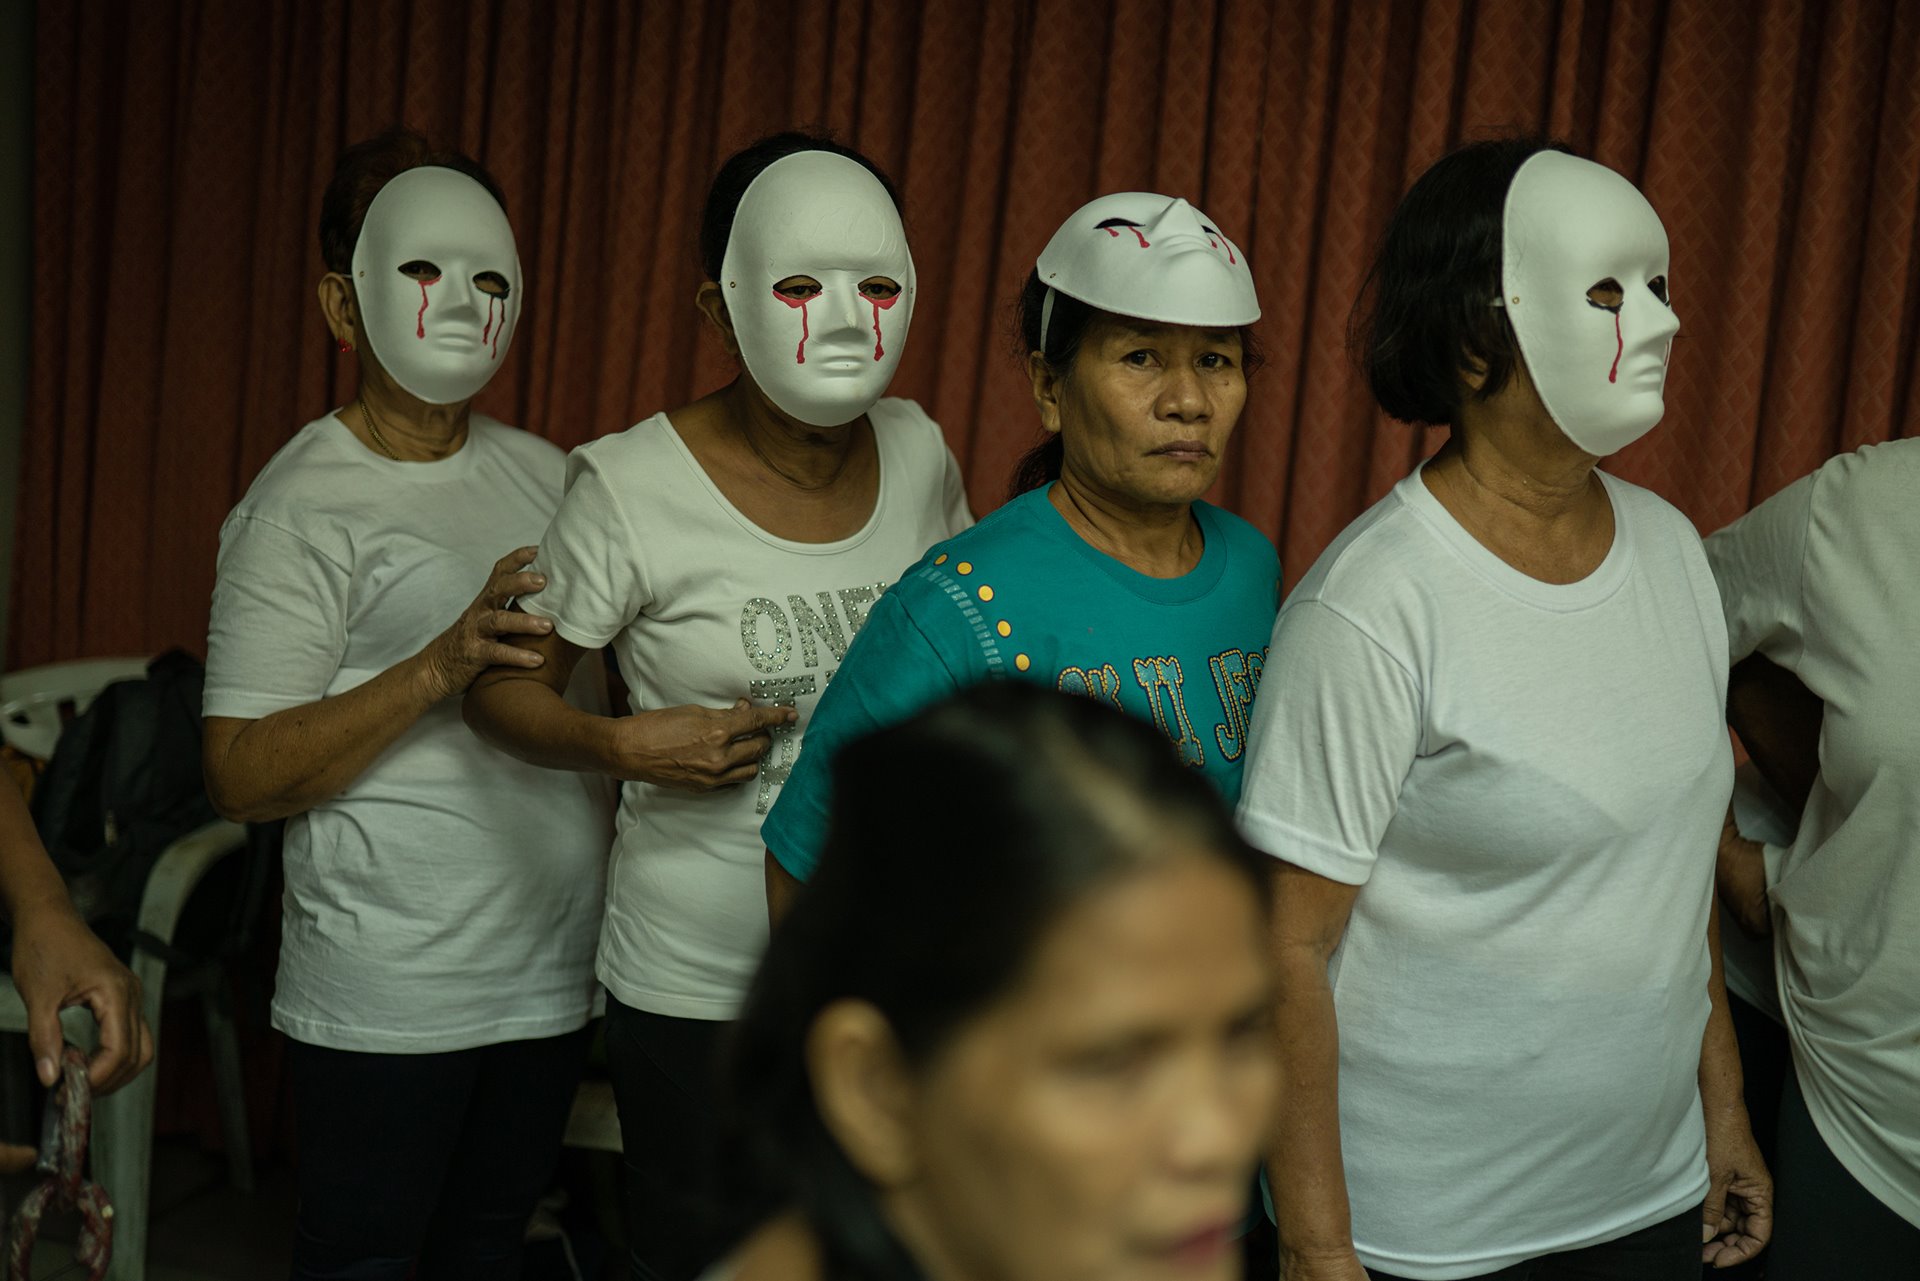 <p>Mothers and widows of war-on-drugs victims rehearse for a theater performance in Tondo, Manila, the Philippines. Sarah Celiz (center) lost two of her sons in 2016 and 2017 and was left to care for her 12 grandchildren. The performance was organized by Paghilom (Healing), a program started in 2016 by former drug user Father Flaviano Villanueva for families of victims of the war on drugs, providing them with support and counseling.&nbsp;</p>
